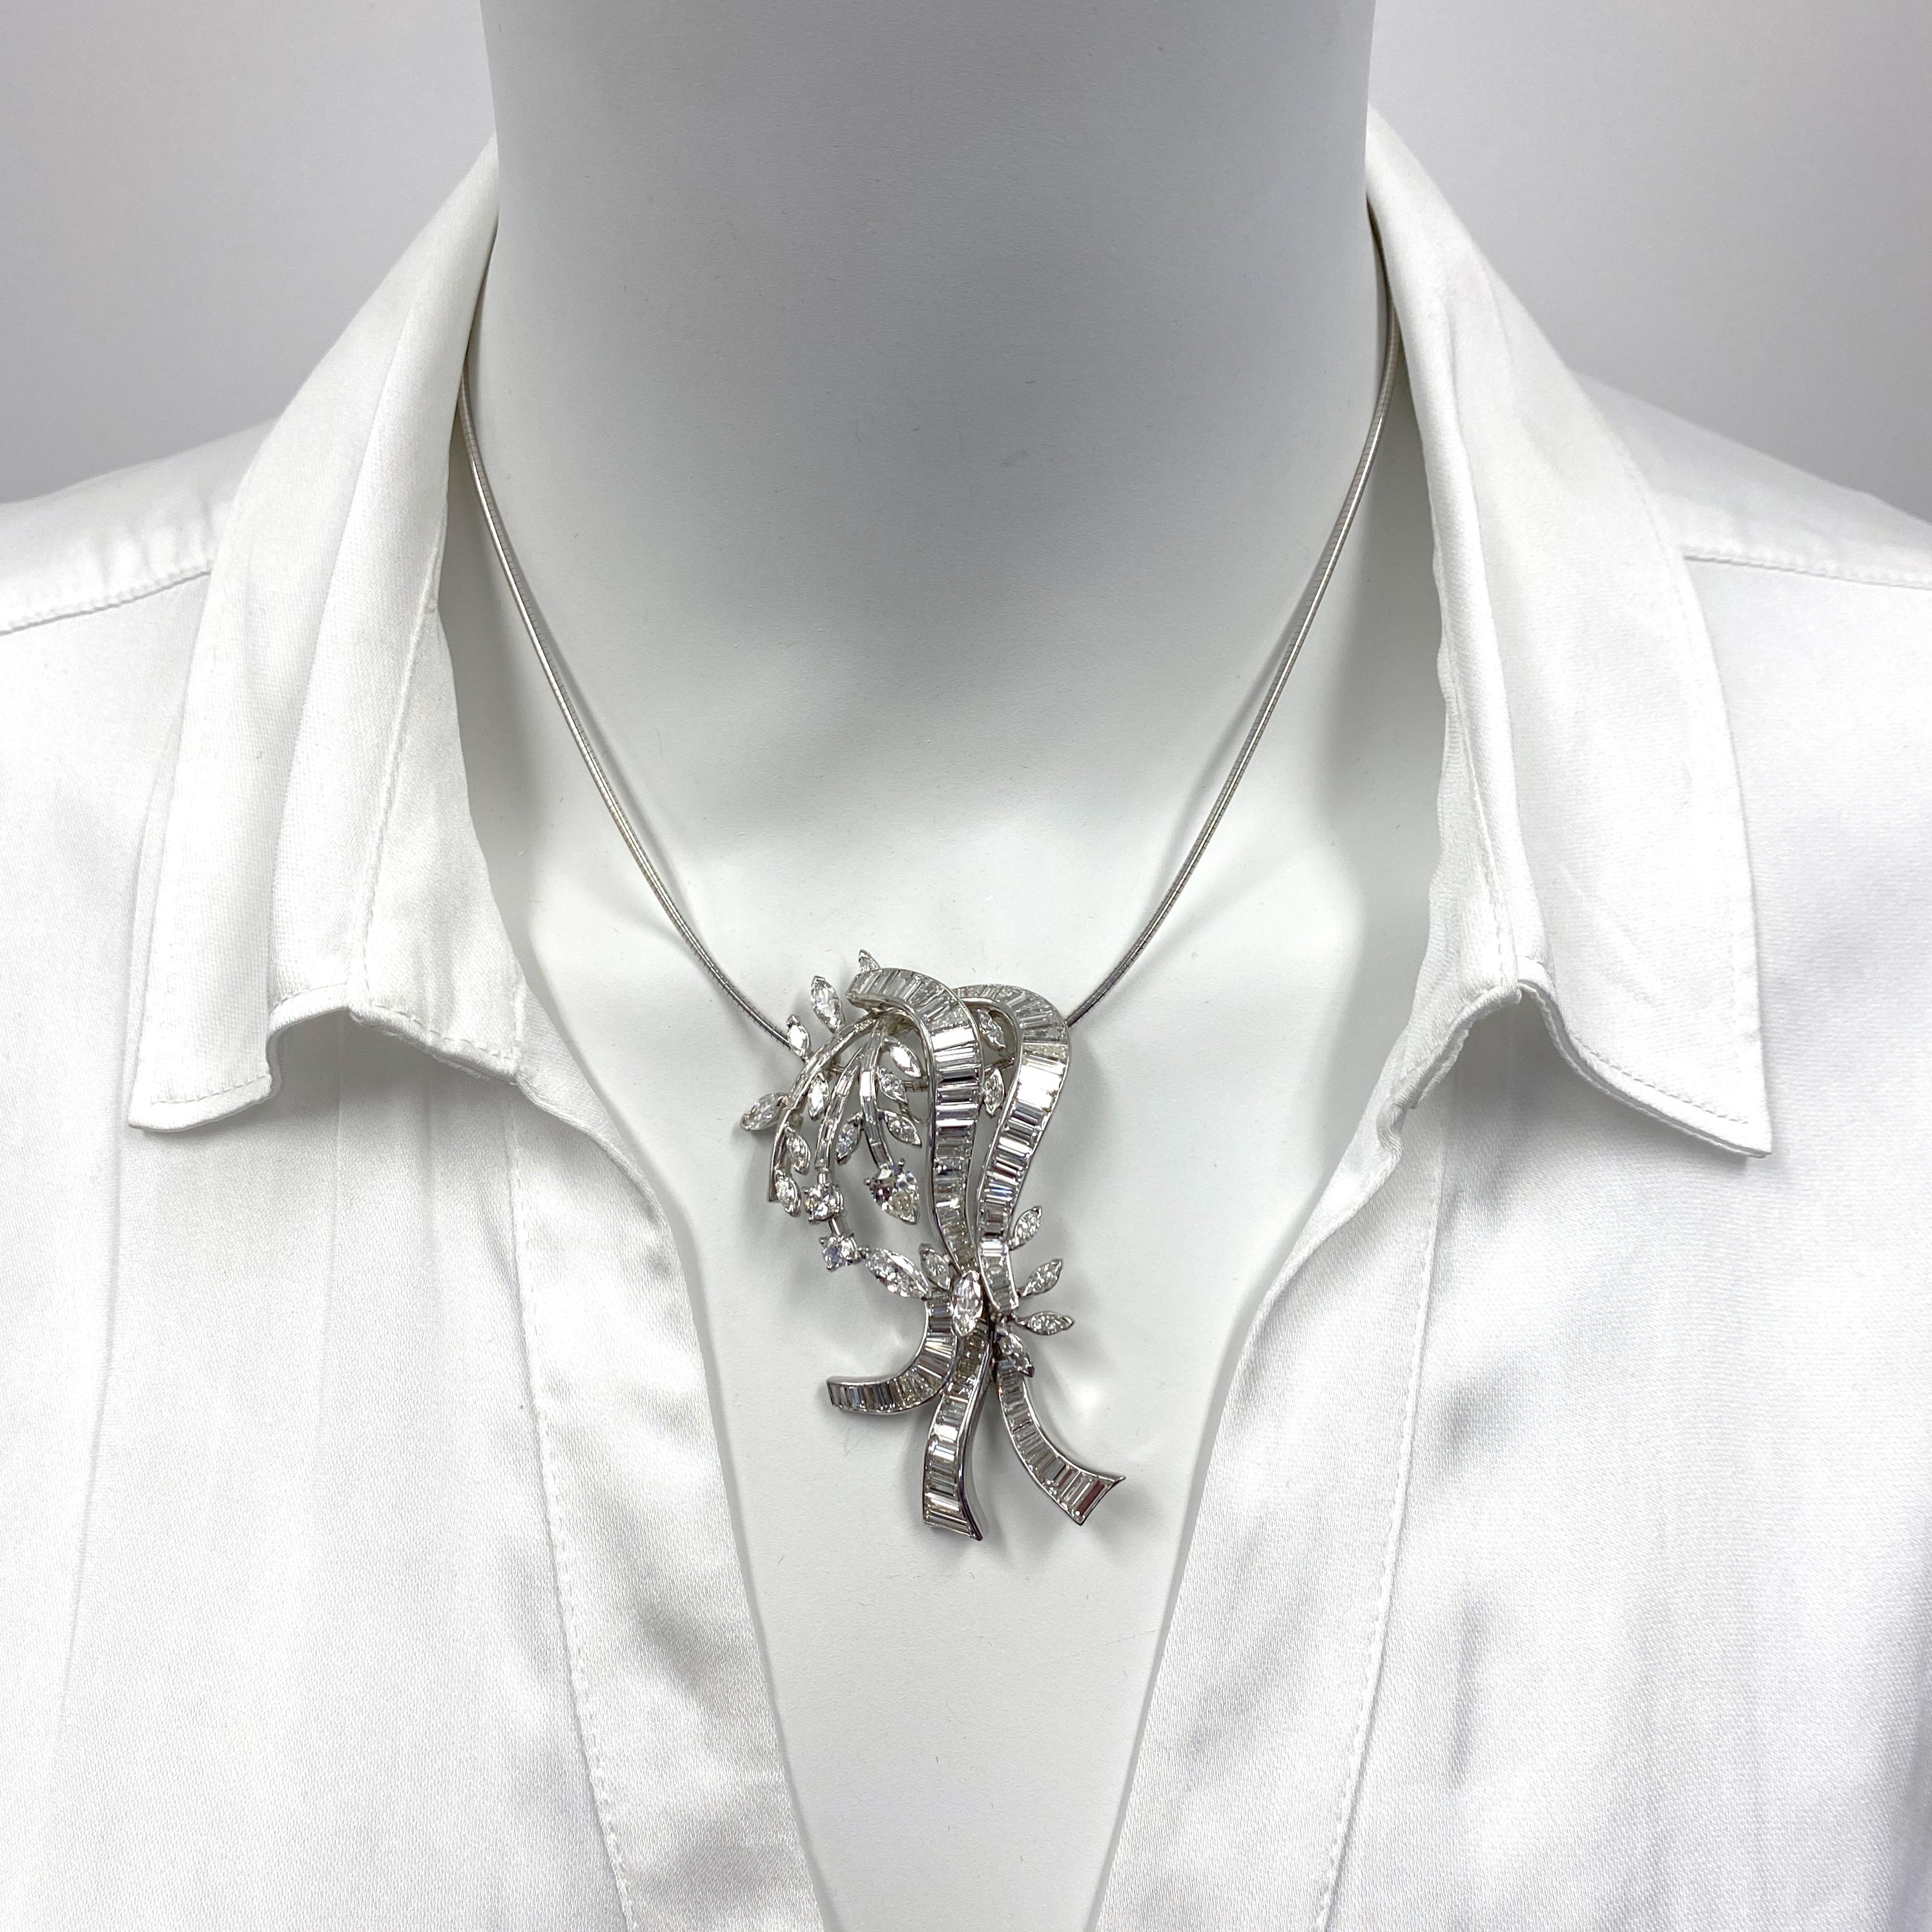 This gorgeous, unapologetically large pendant was originally a gorgeous, unapologetically large brooch, custom-made by a New York jeweler in the mid-1980s.  

Eytan Brandes converted the brooch to a showstopping pendant -- a much sexier and more